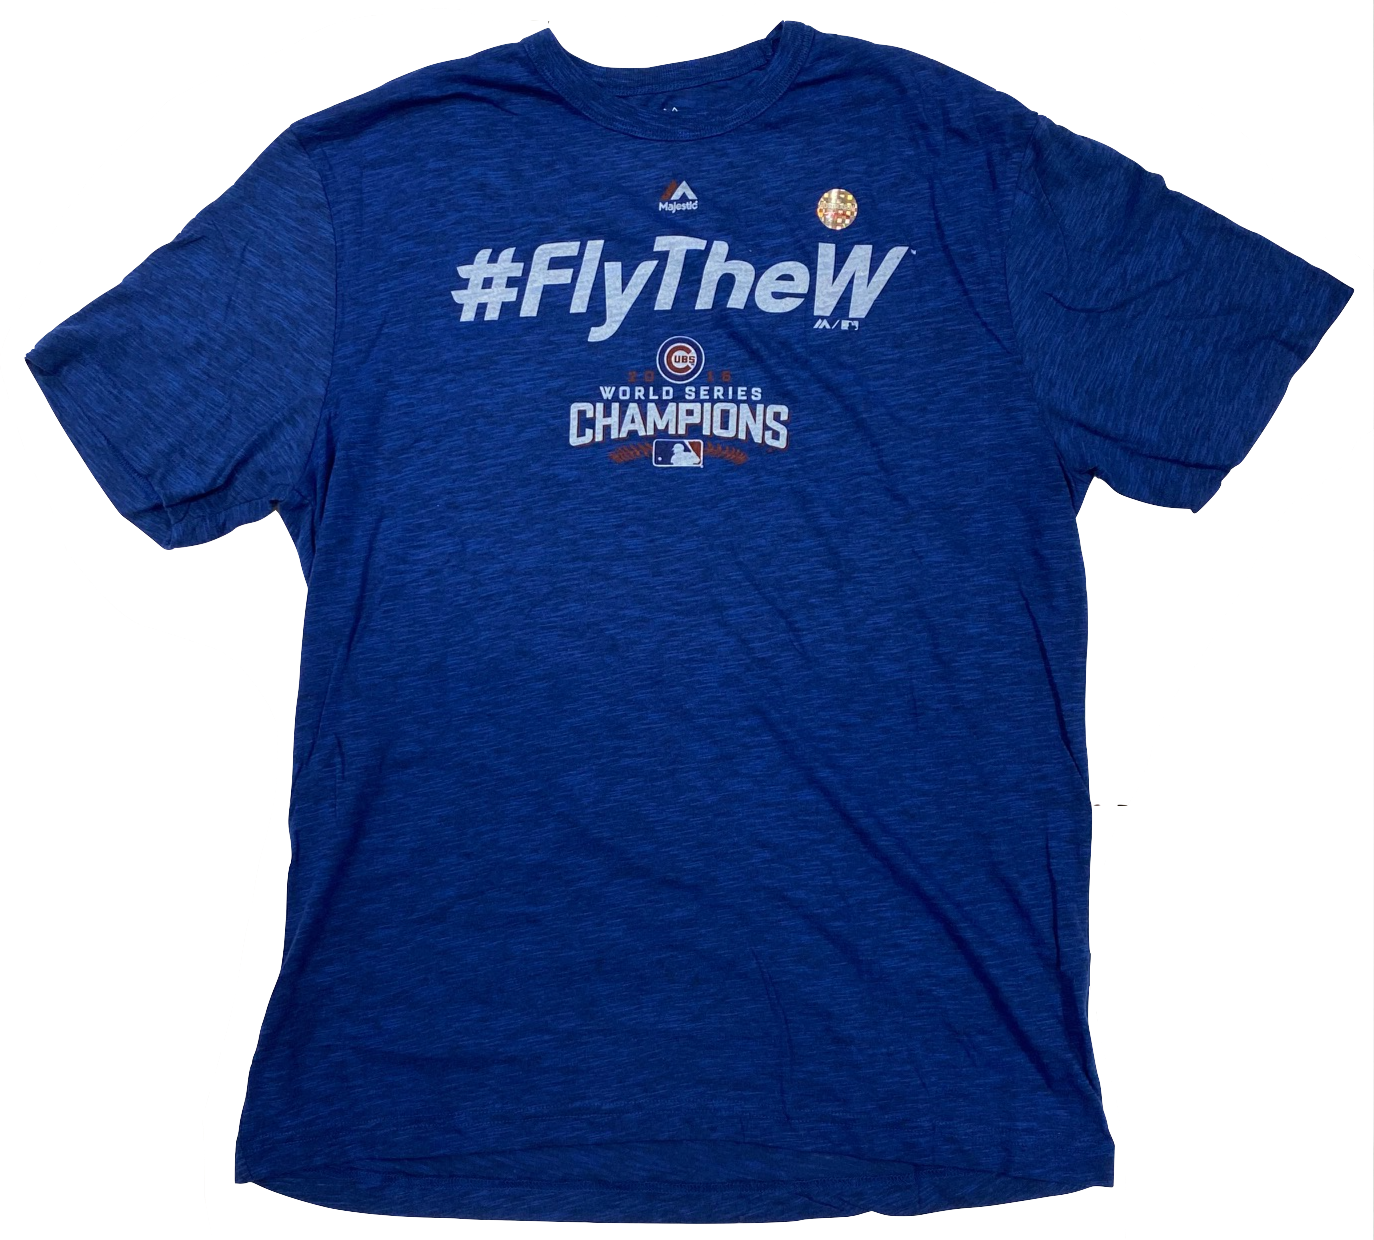 Men's Chicago Cubs 2016 World Series Champions #FLY THE W Hyper Blue Tee